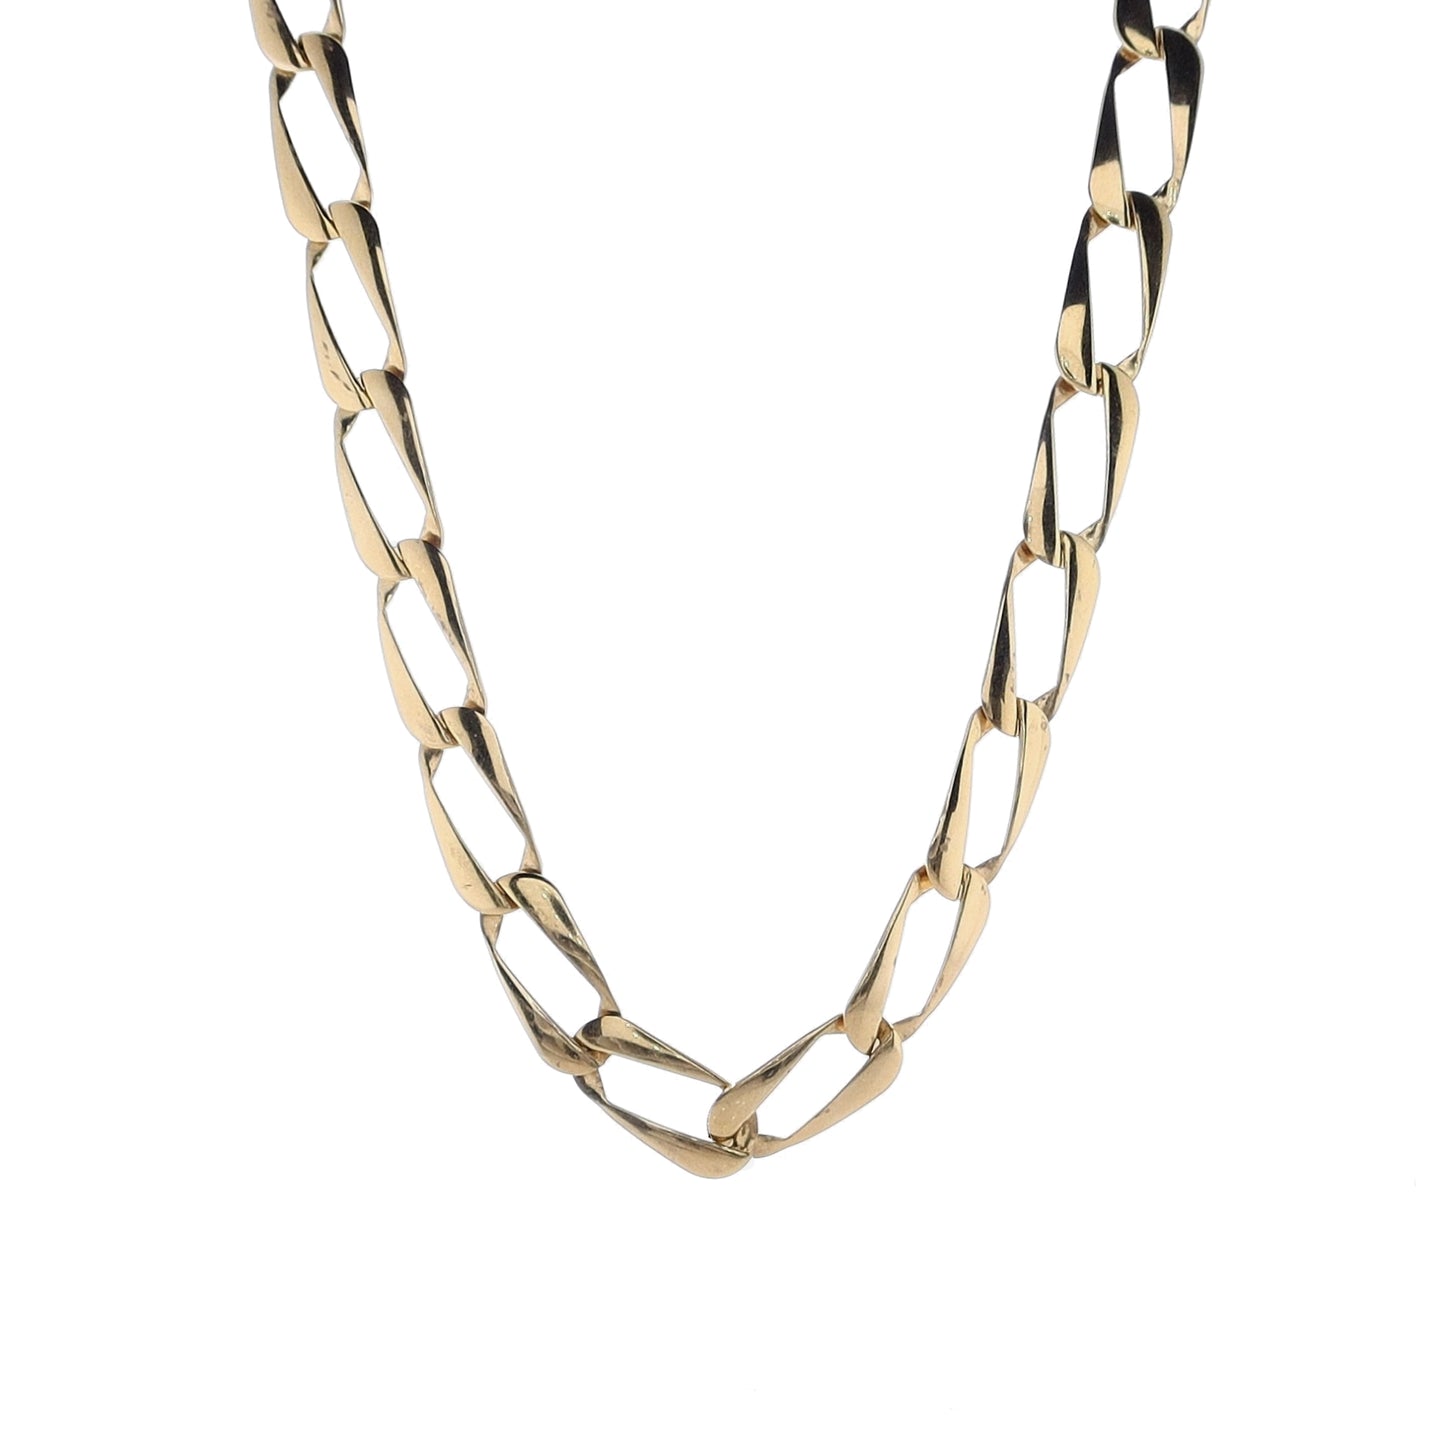 Estate 14k Yellow Gold Elongated Polished Curb Link 20" Chain Necklace